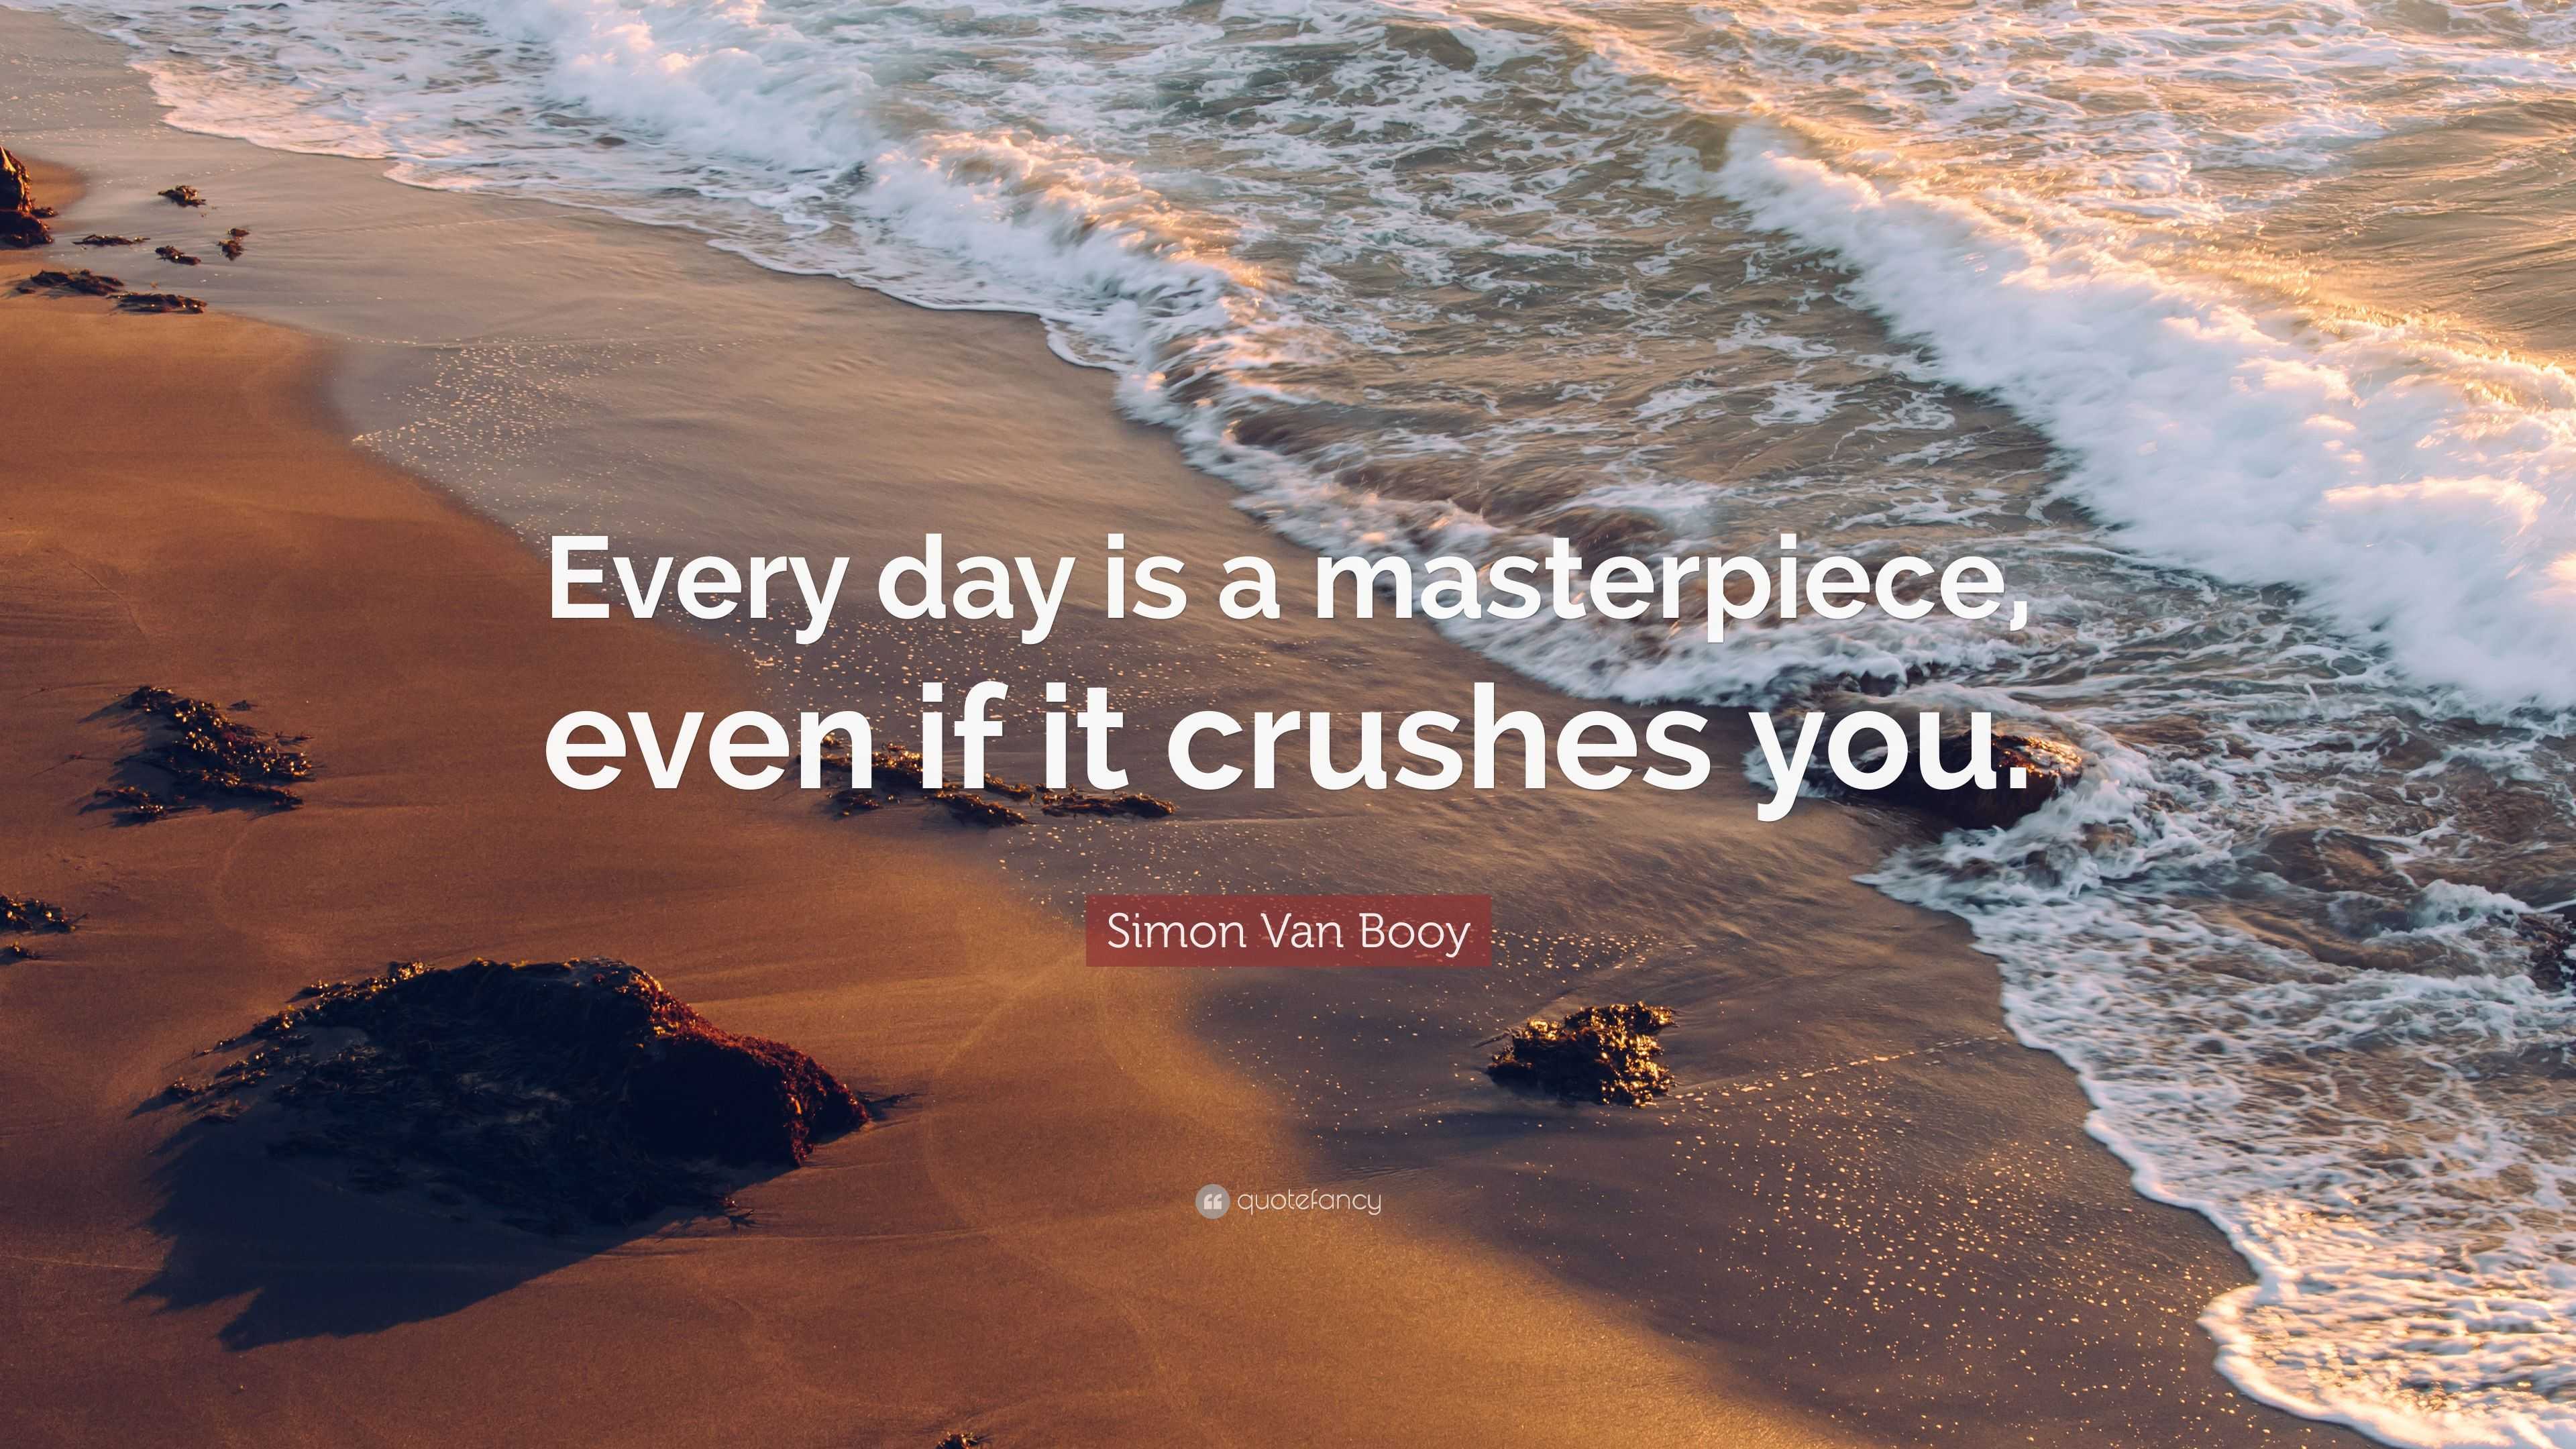 Simon Van Booy Quote: “Every day is a masterpiece, even if it crushes you.”